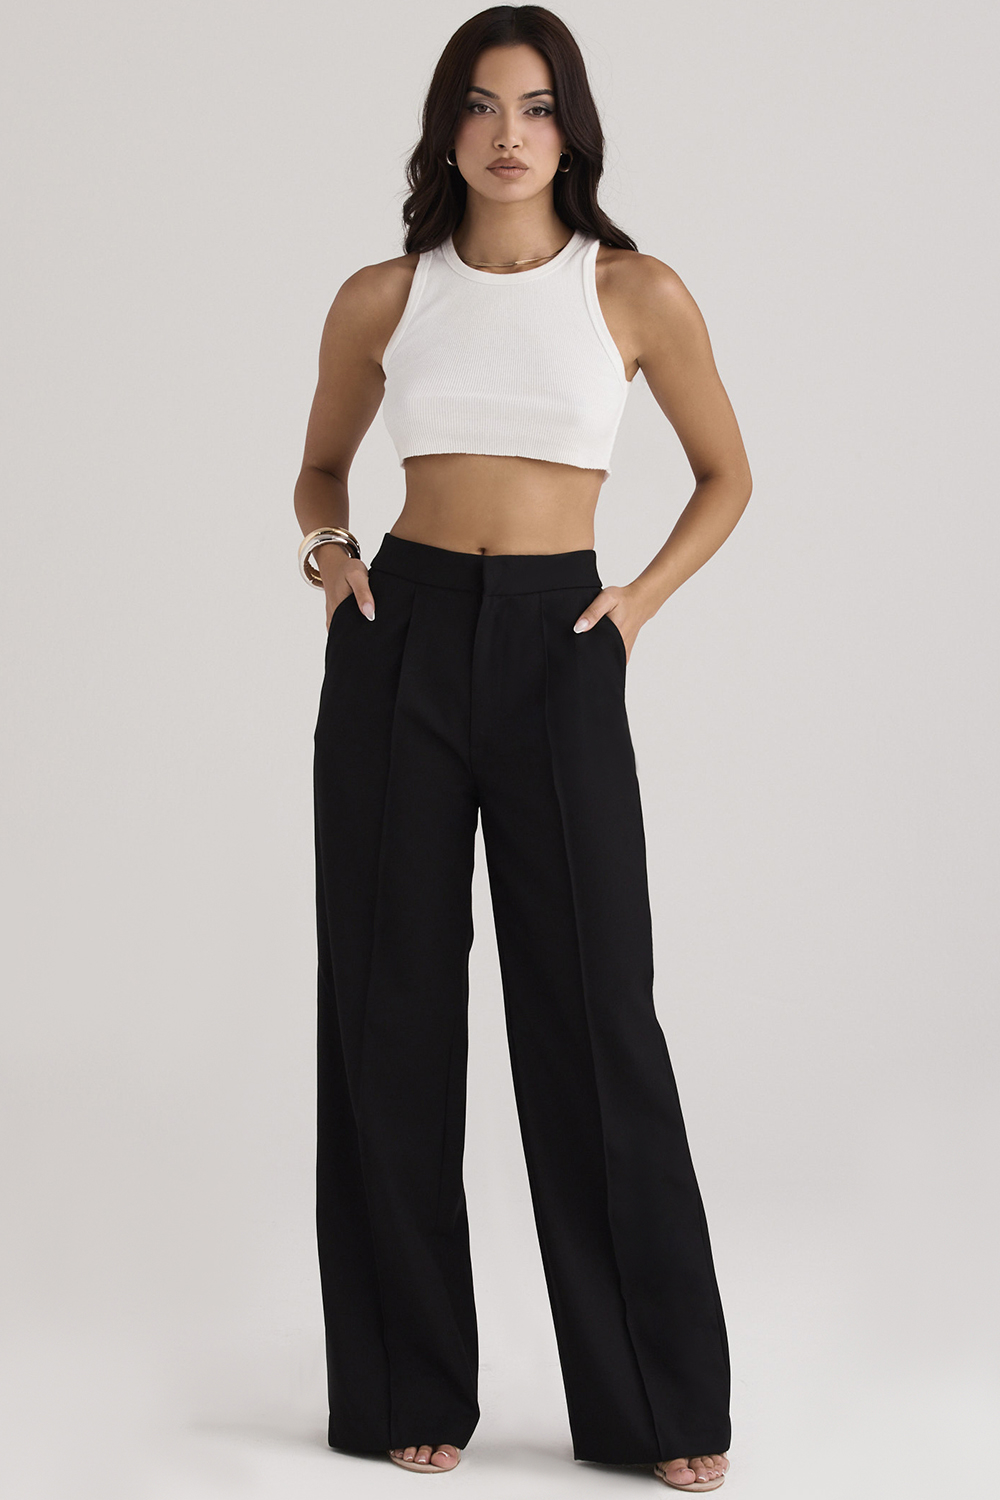 Clothing : Trousers : 'Alivia' Black Loose Fit Trousers